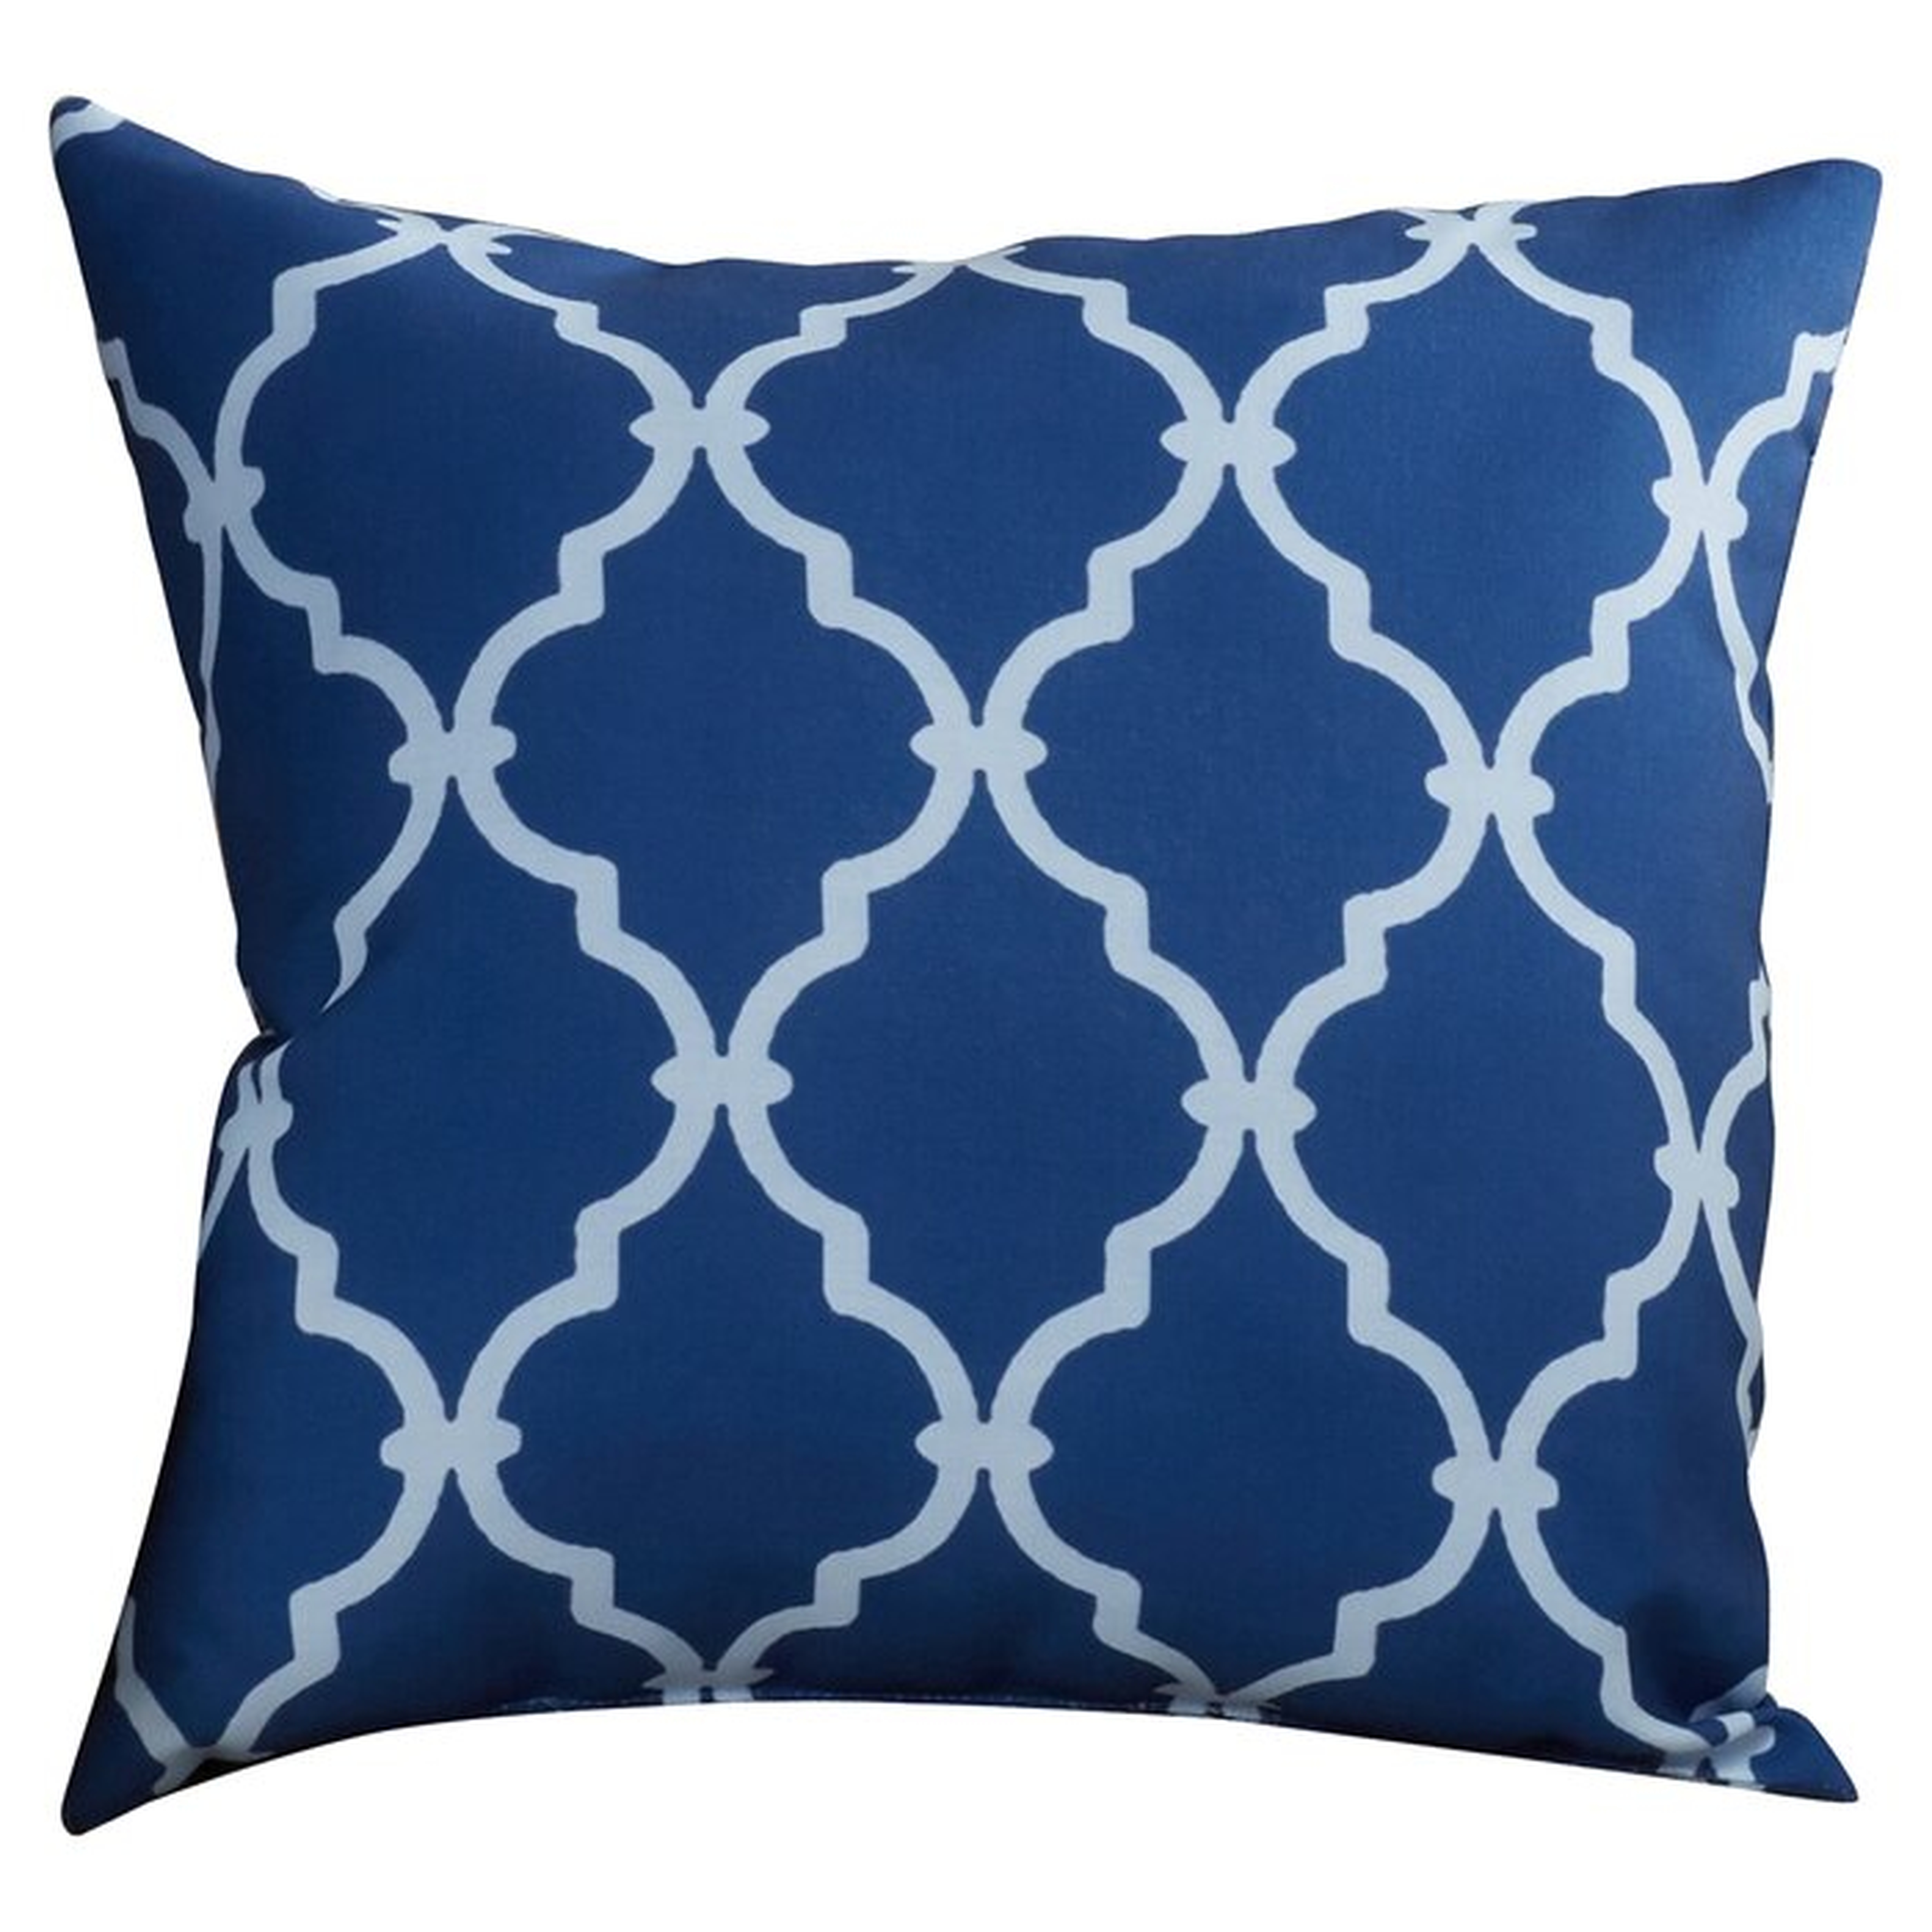 Reuter Square Pillow Cover and Insert - Wayfair